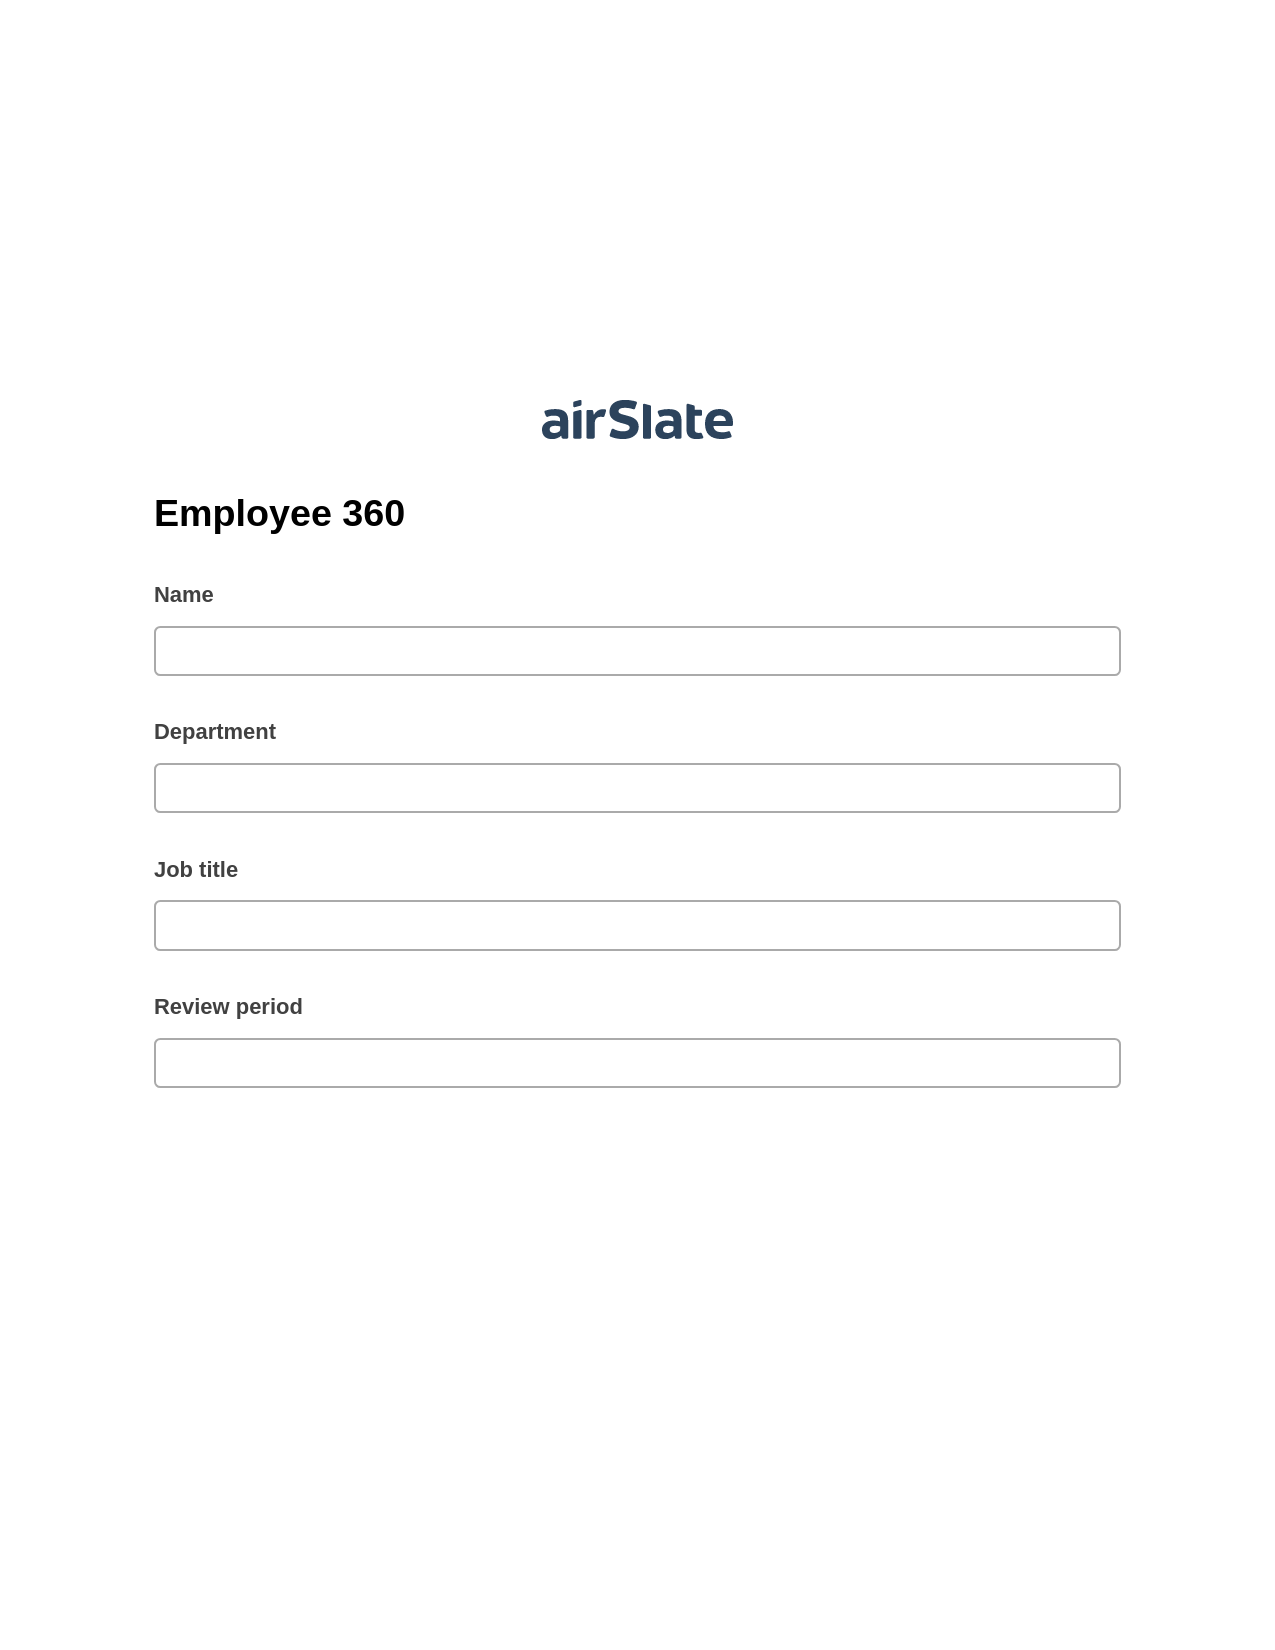 Employee 360 Pre-fill from MS Dynamics 365 Records, Remove Tags From Slate Bot, Archive to OneDrive Bot